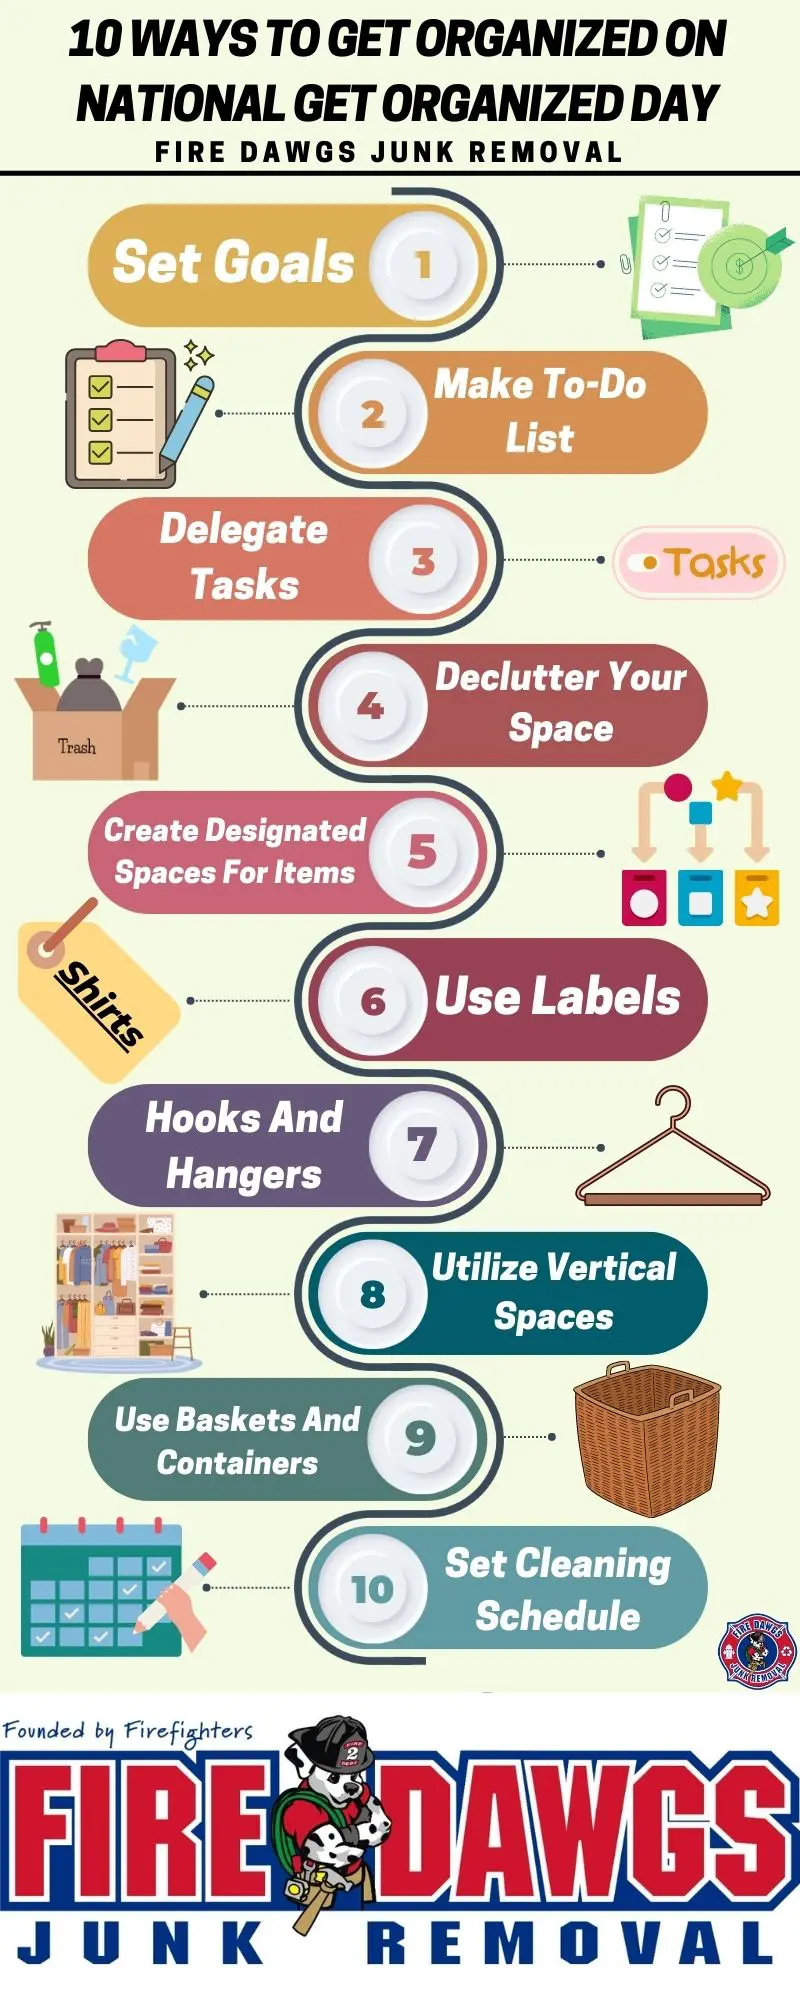 A Graphic for 10 Ways to Get Organized on National Get Organized Day